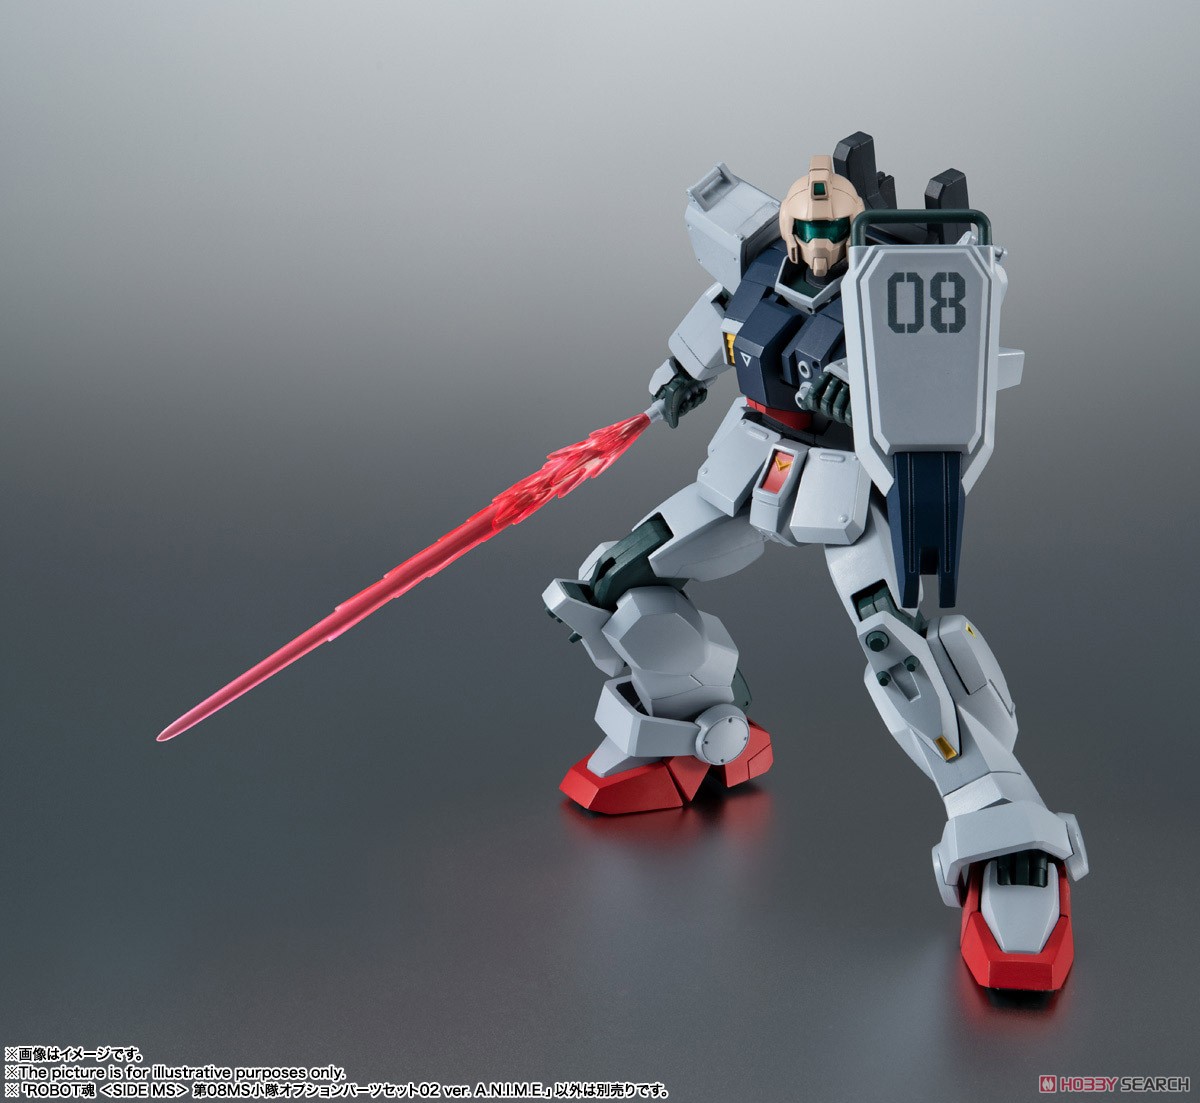 ROBOT魂 ＜ SIDE MS ＞ 第08MS小隊オプションパーツセット02 ver. A.N.I.M.E. (完成品) その他の画像3